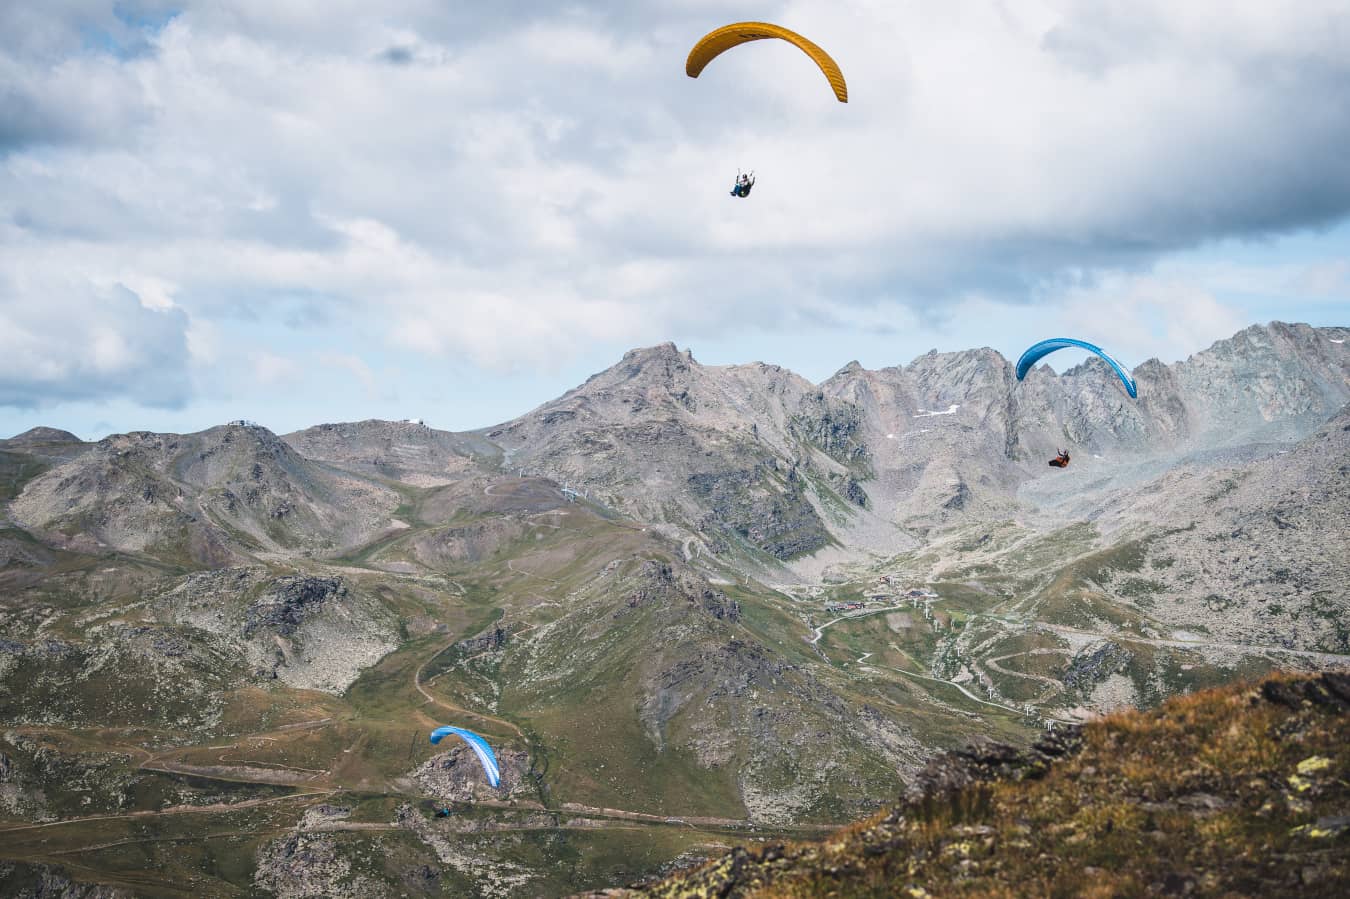 Paragliding in Les 3 Vallées, here in the Belleville valley in Les Menuires